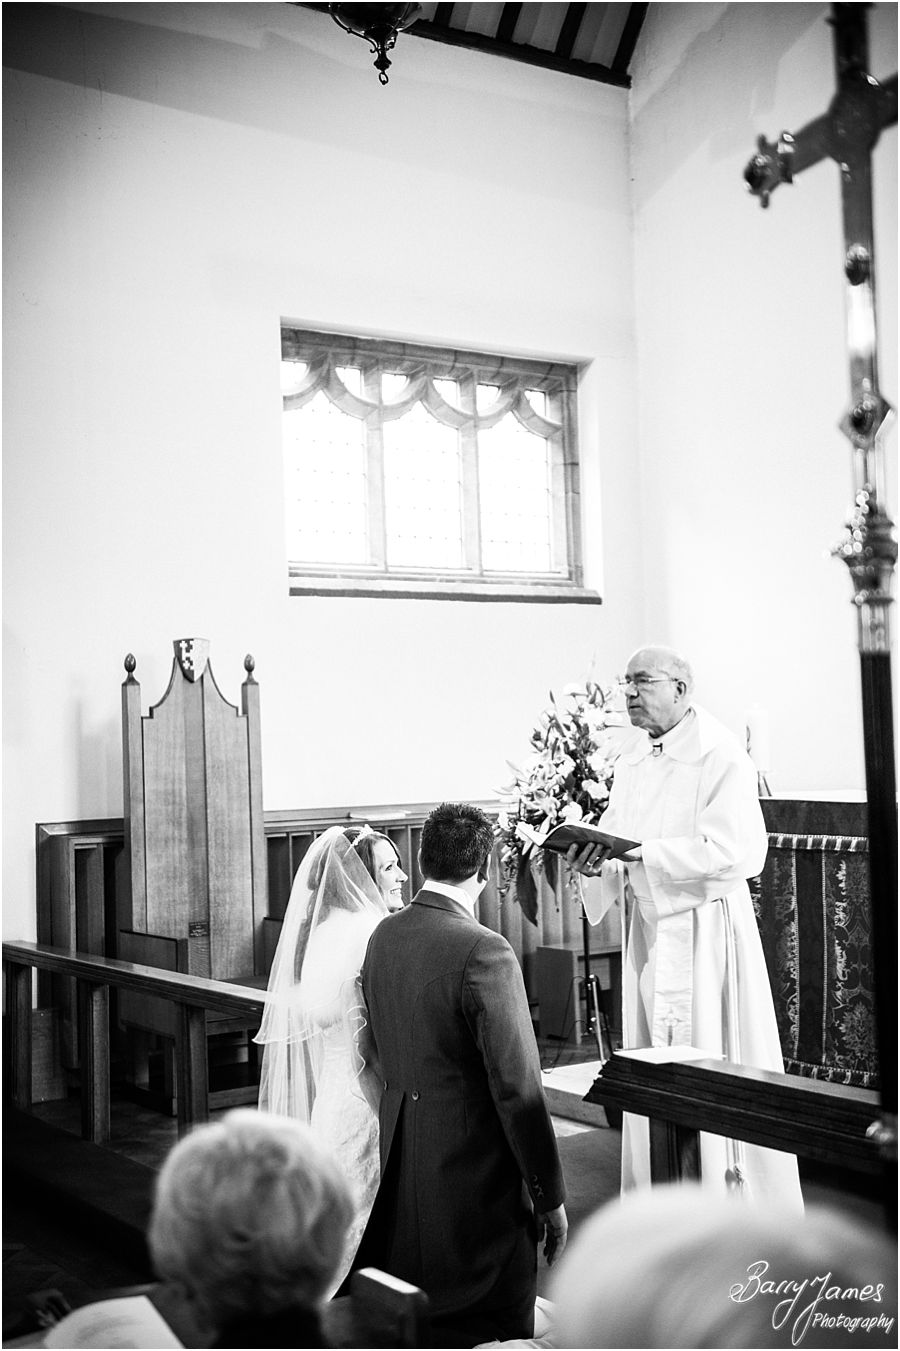 Contemporary creative wedding photography at All Saints Church in Streetly by Experienced Wedding Photographer Barry James